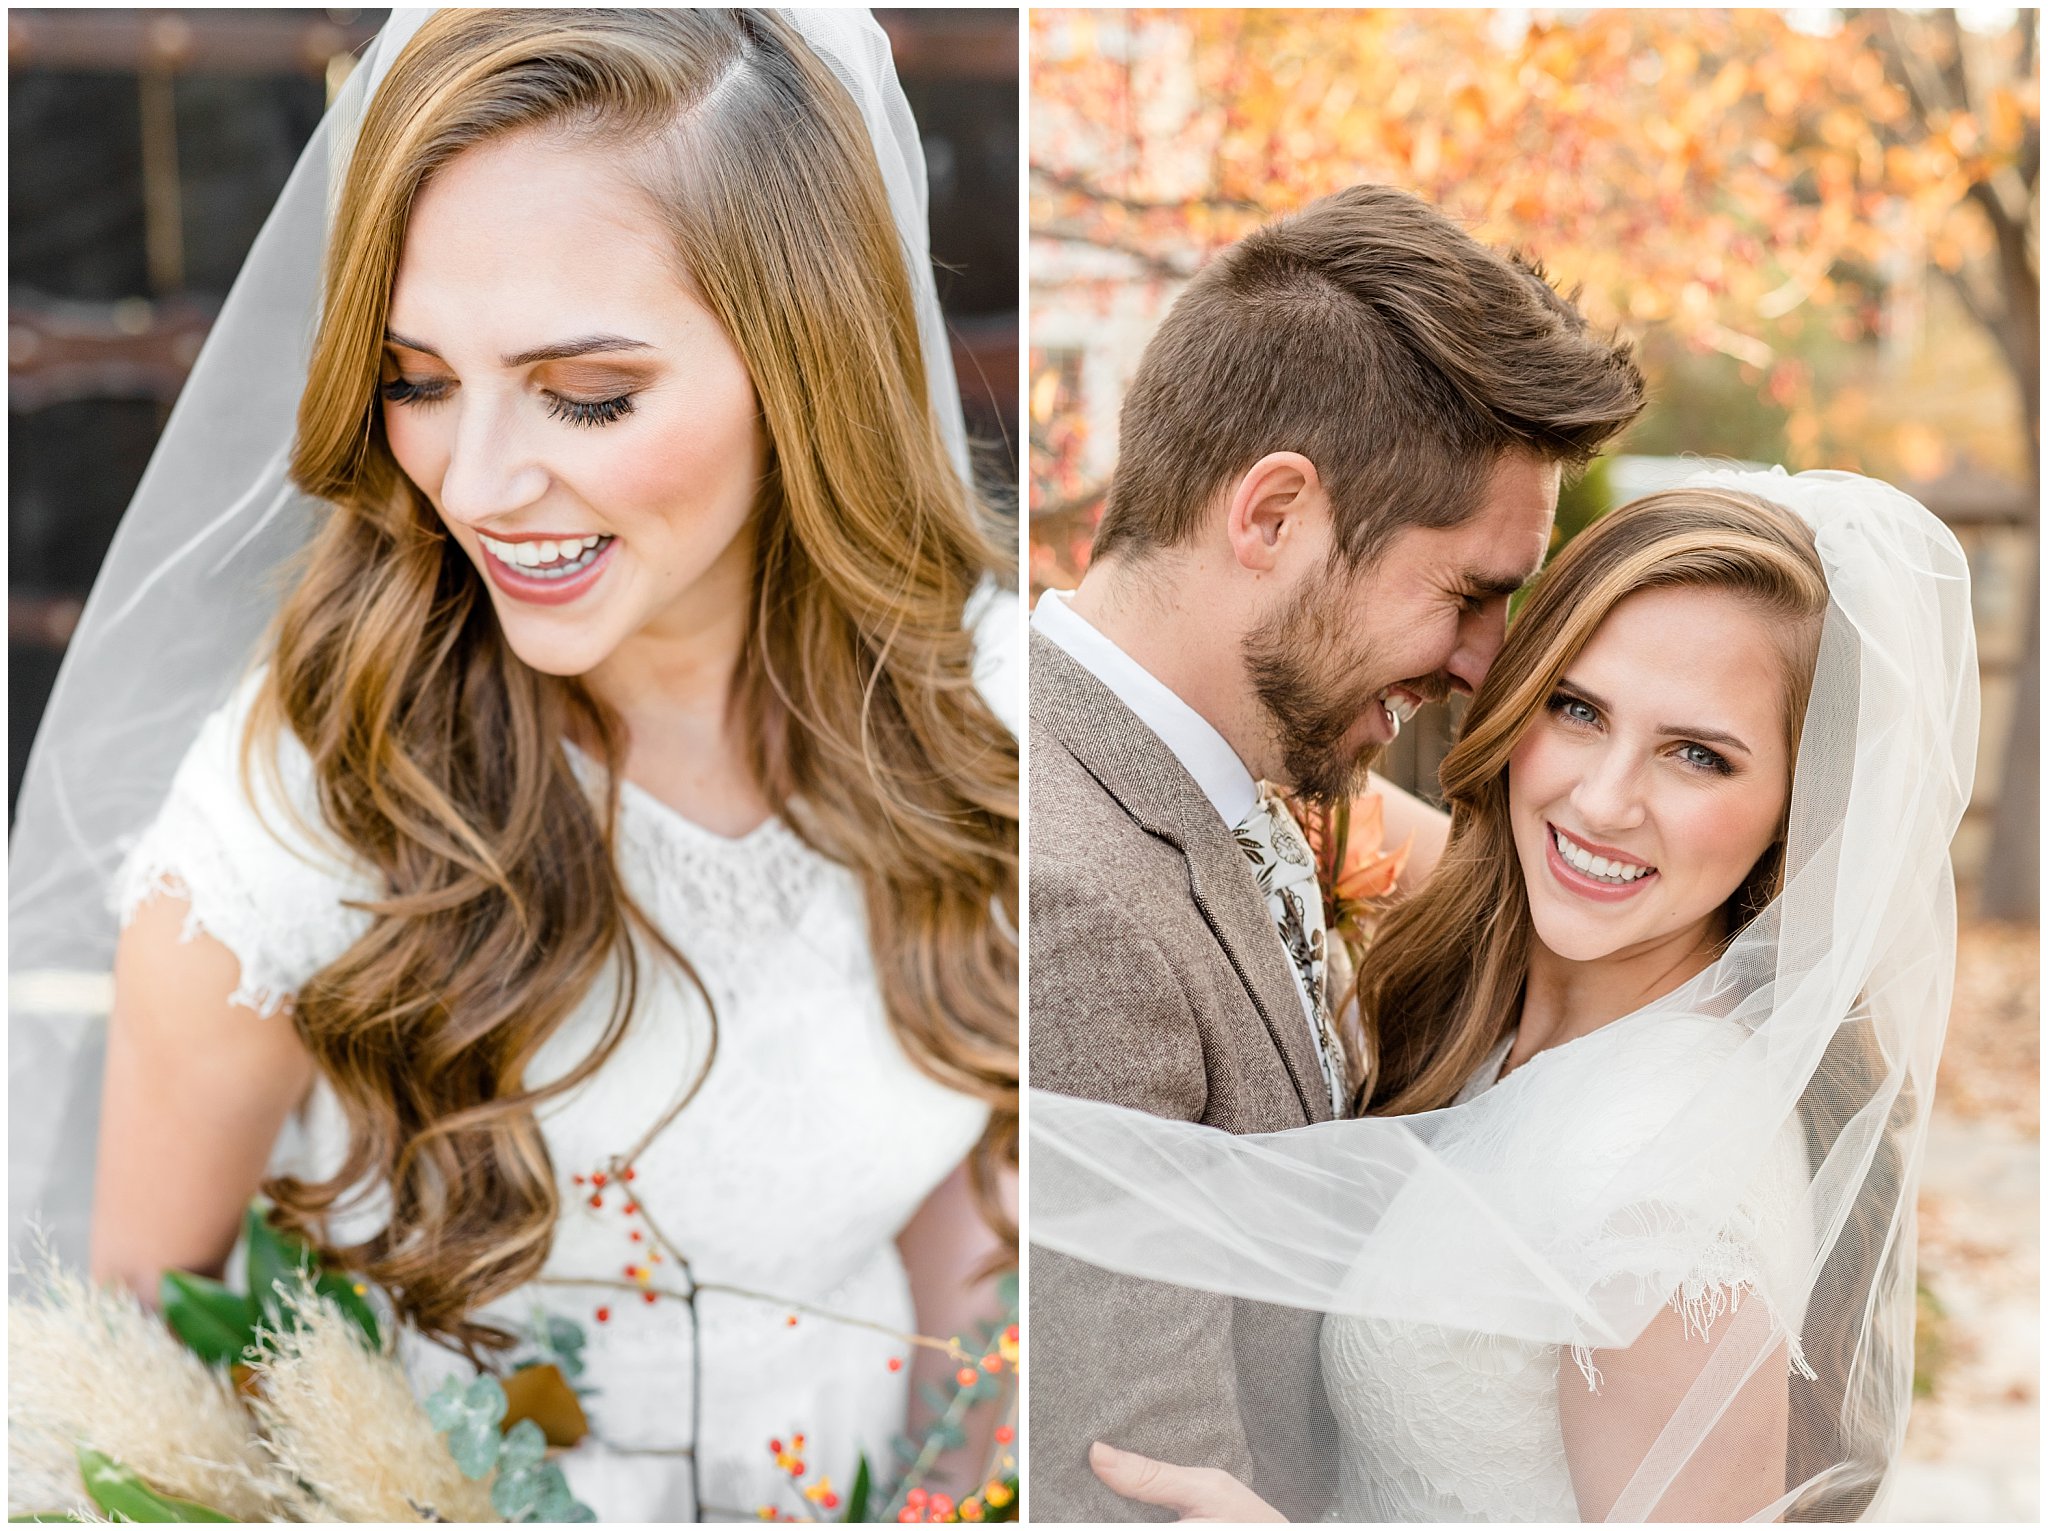 Bride and groom portraits | fun and happy bride and groom | Fall wedding inspiration at Wadley Farms in Utah | Jessie and Dallin Photography